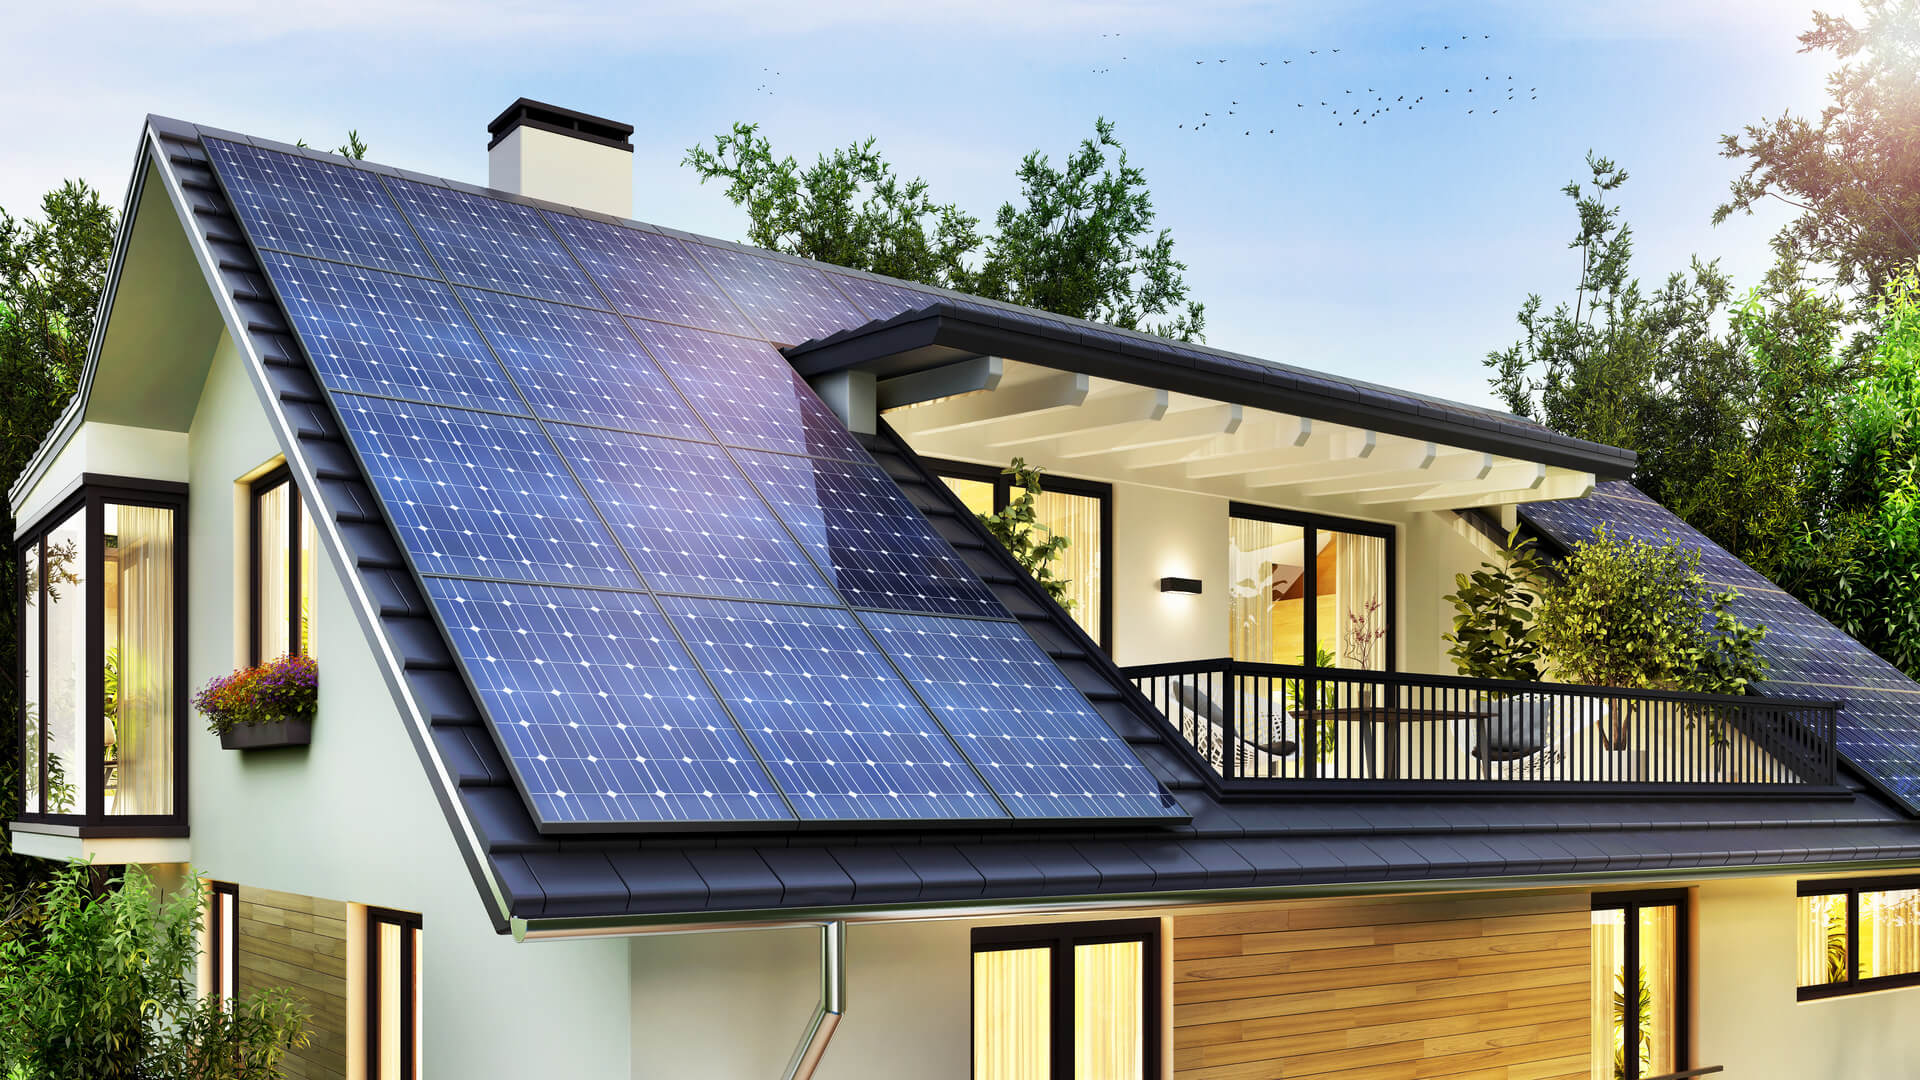 Solar-powered homes offer 6 key benefits